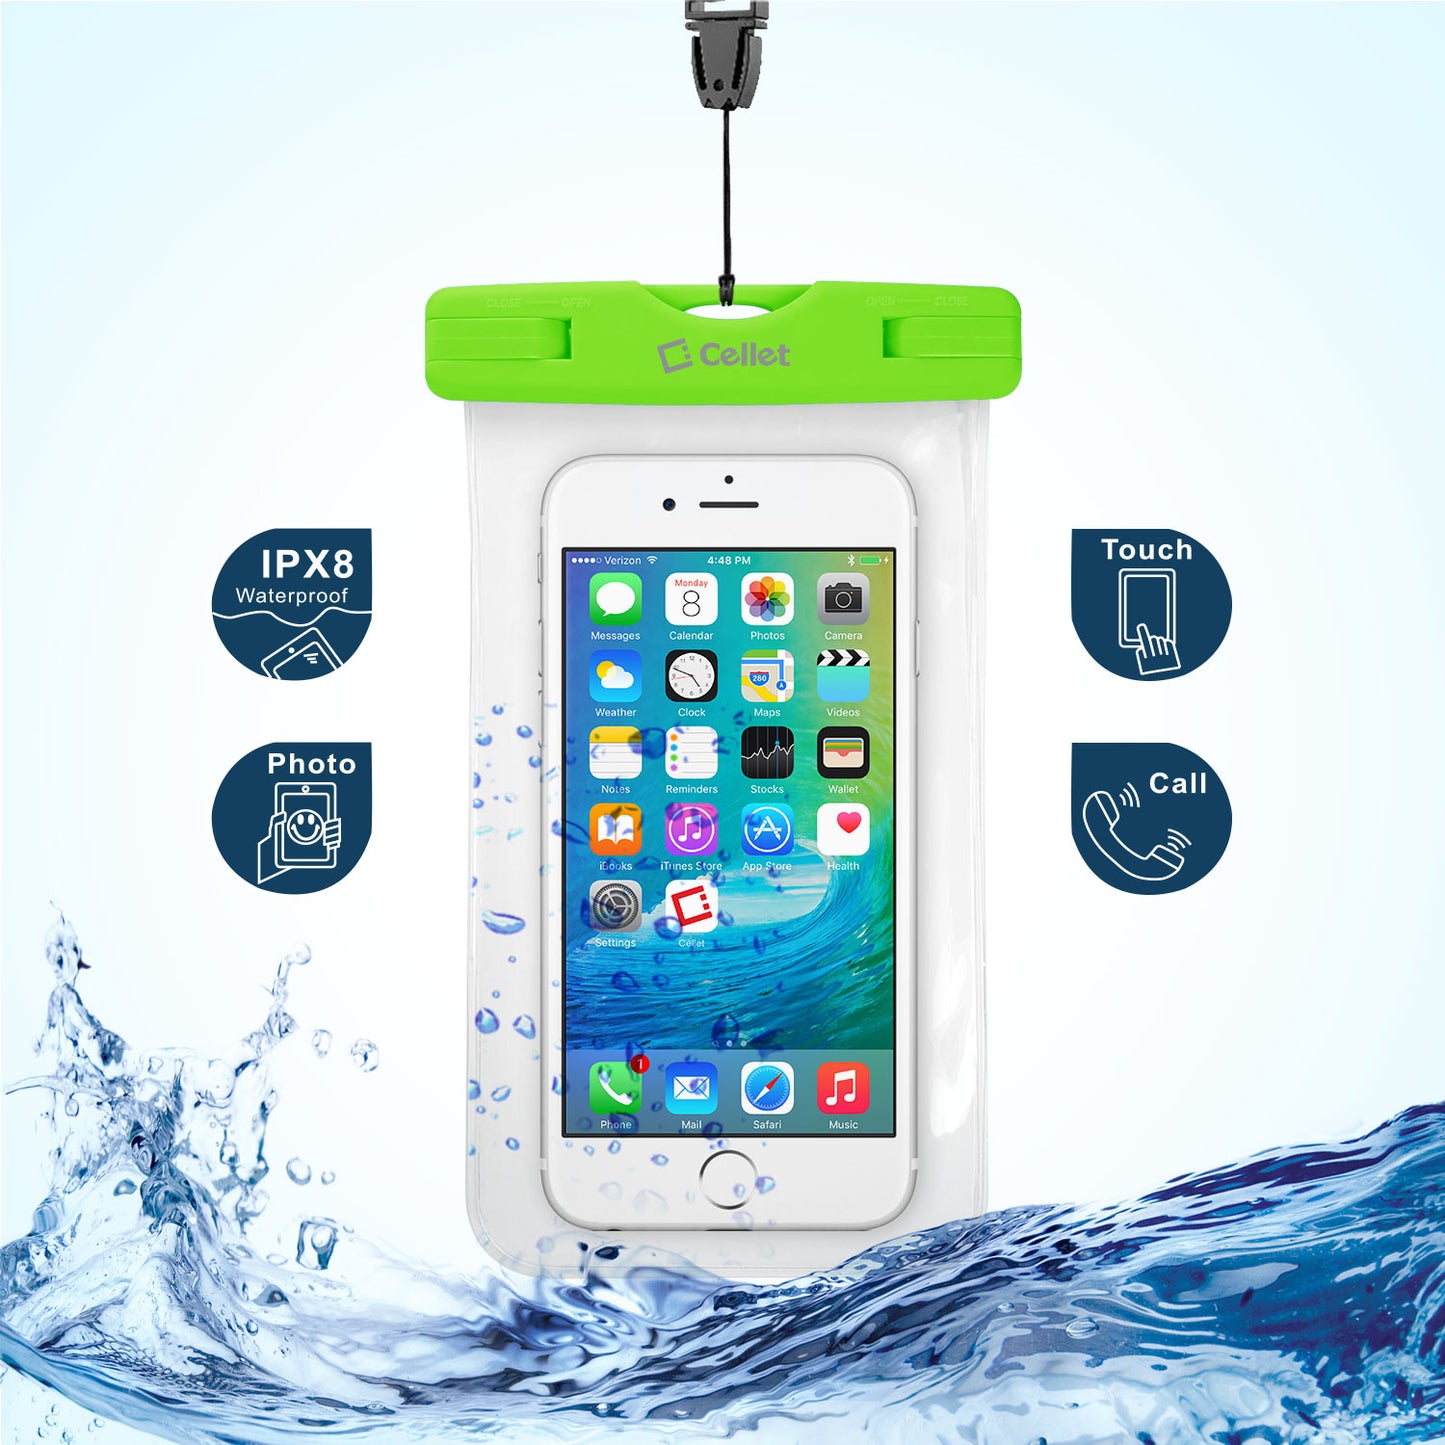 WATER1PK - Cellet Universal IPX8 Waterproof Case for Apple iPhone 7 Plus, Large Smartphones, Digital Cameras, MP3 Players and More - Pink